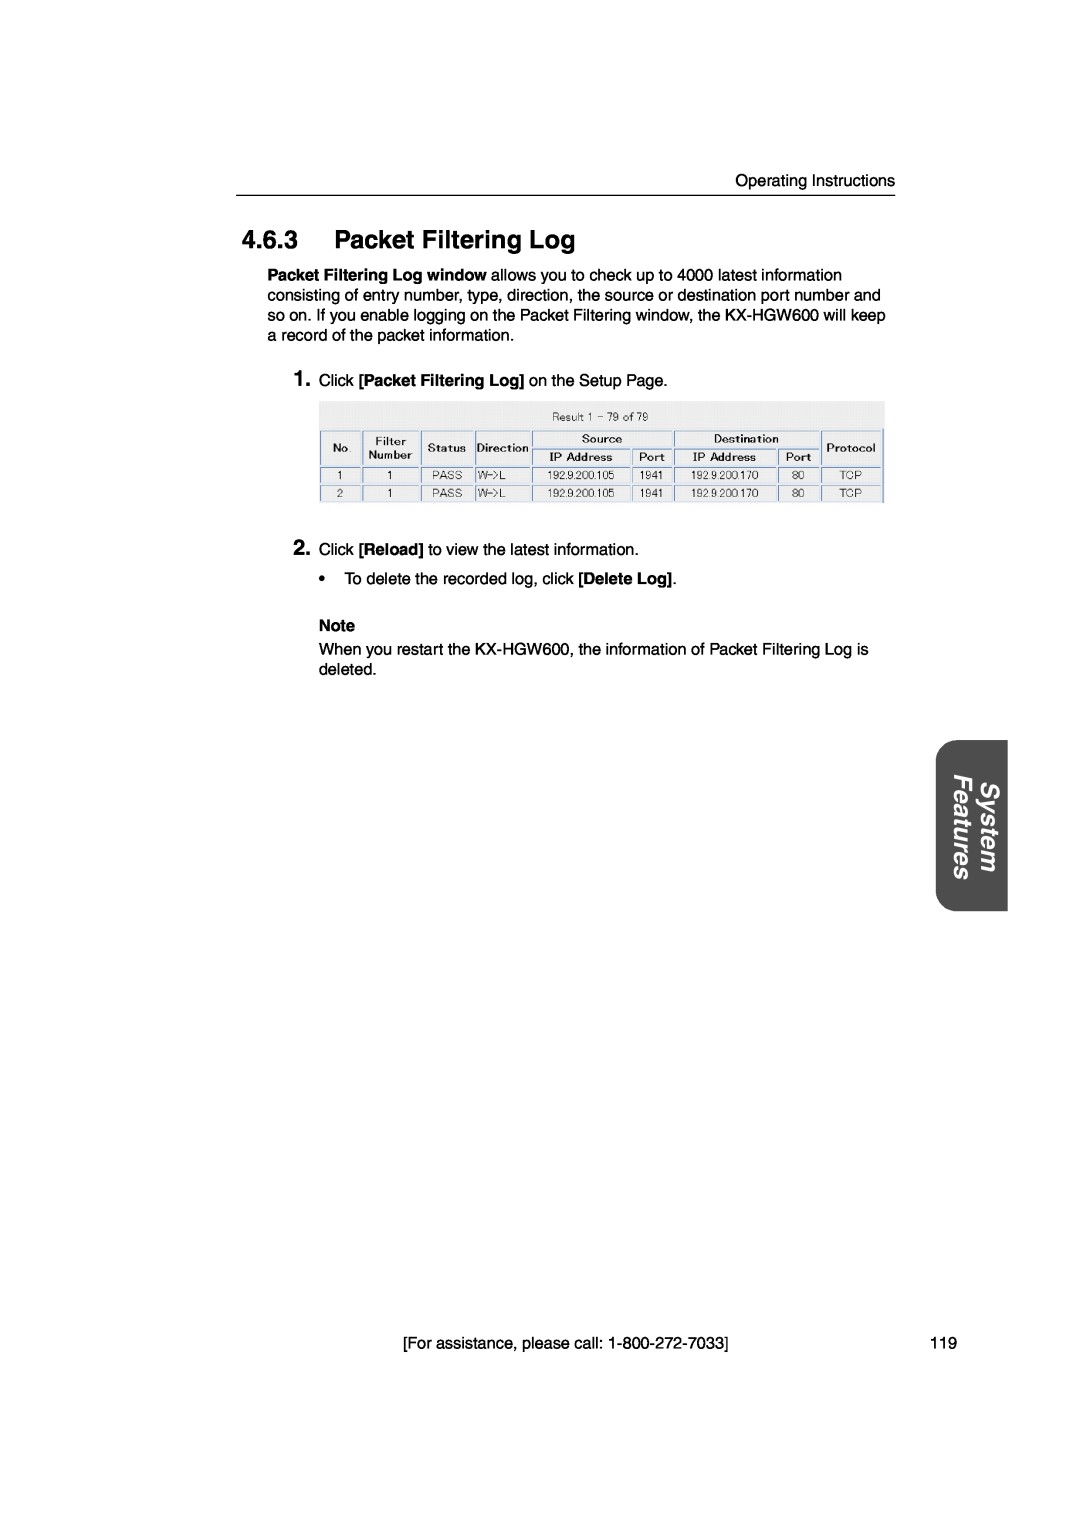 Panasonic KX-HGW600 manual Packet Filtering Log, Features, System 